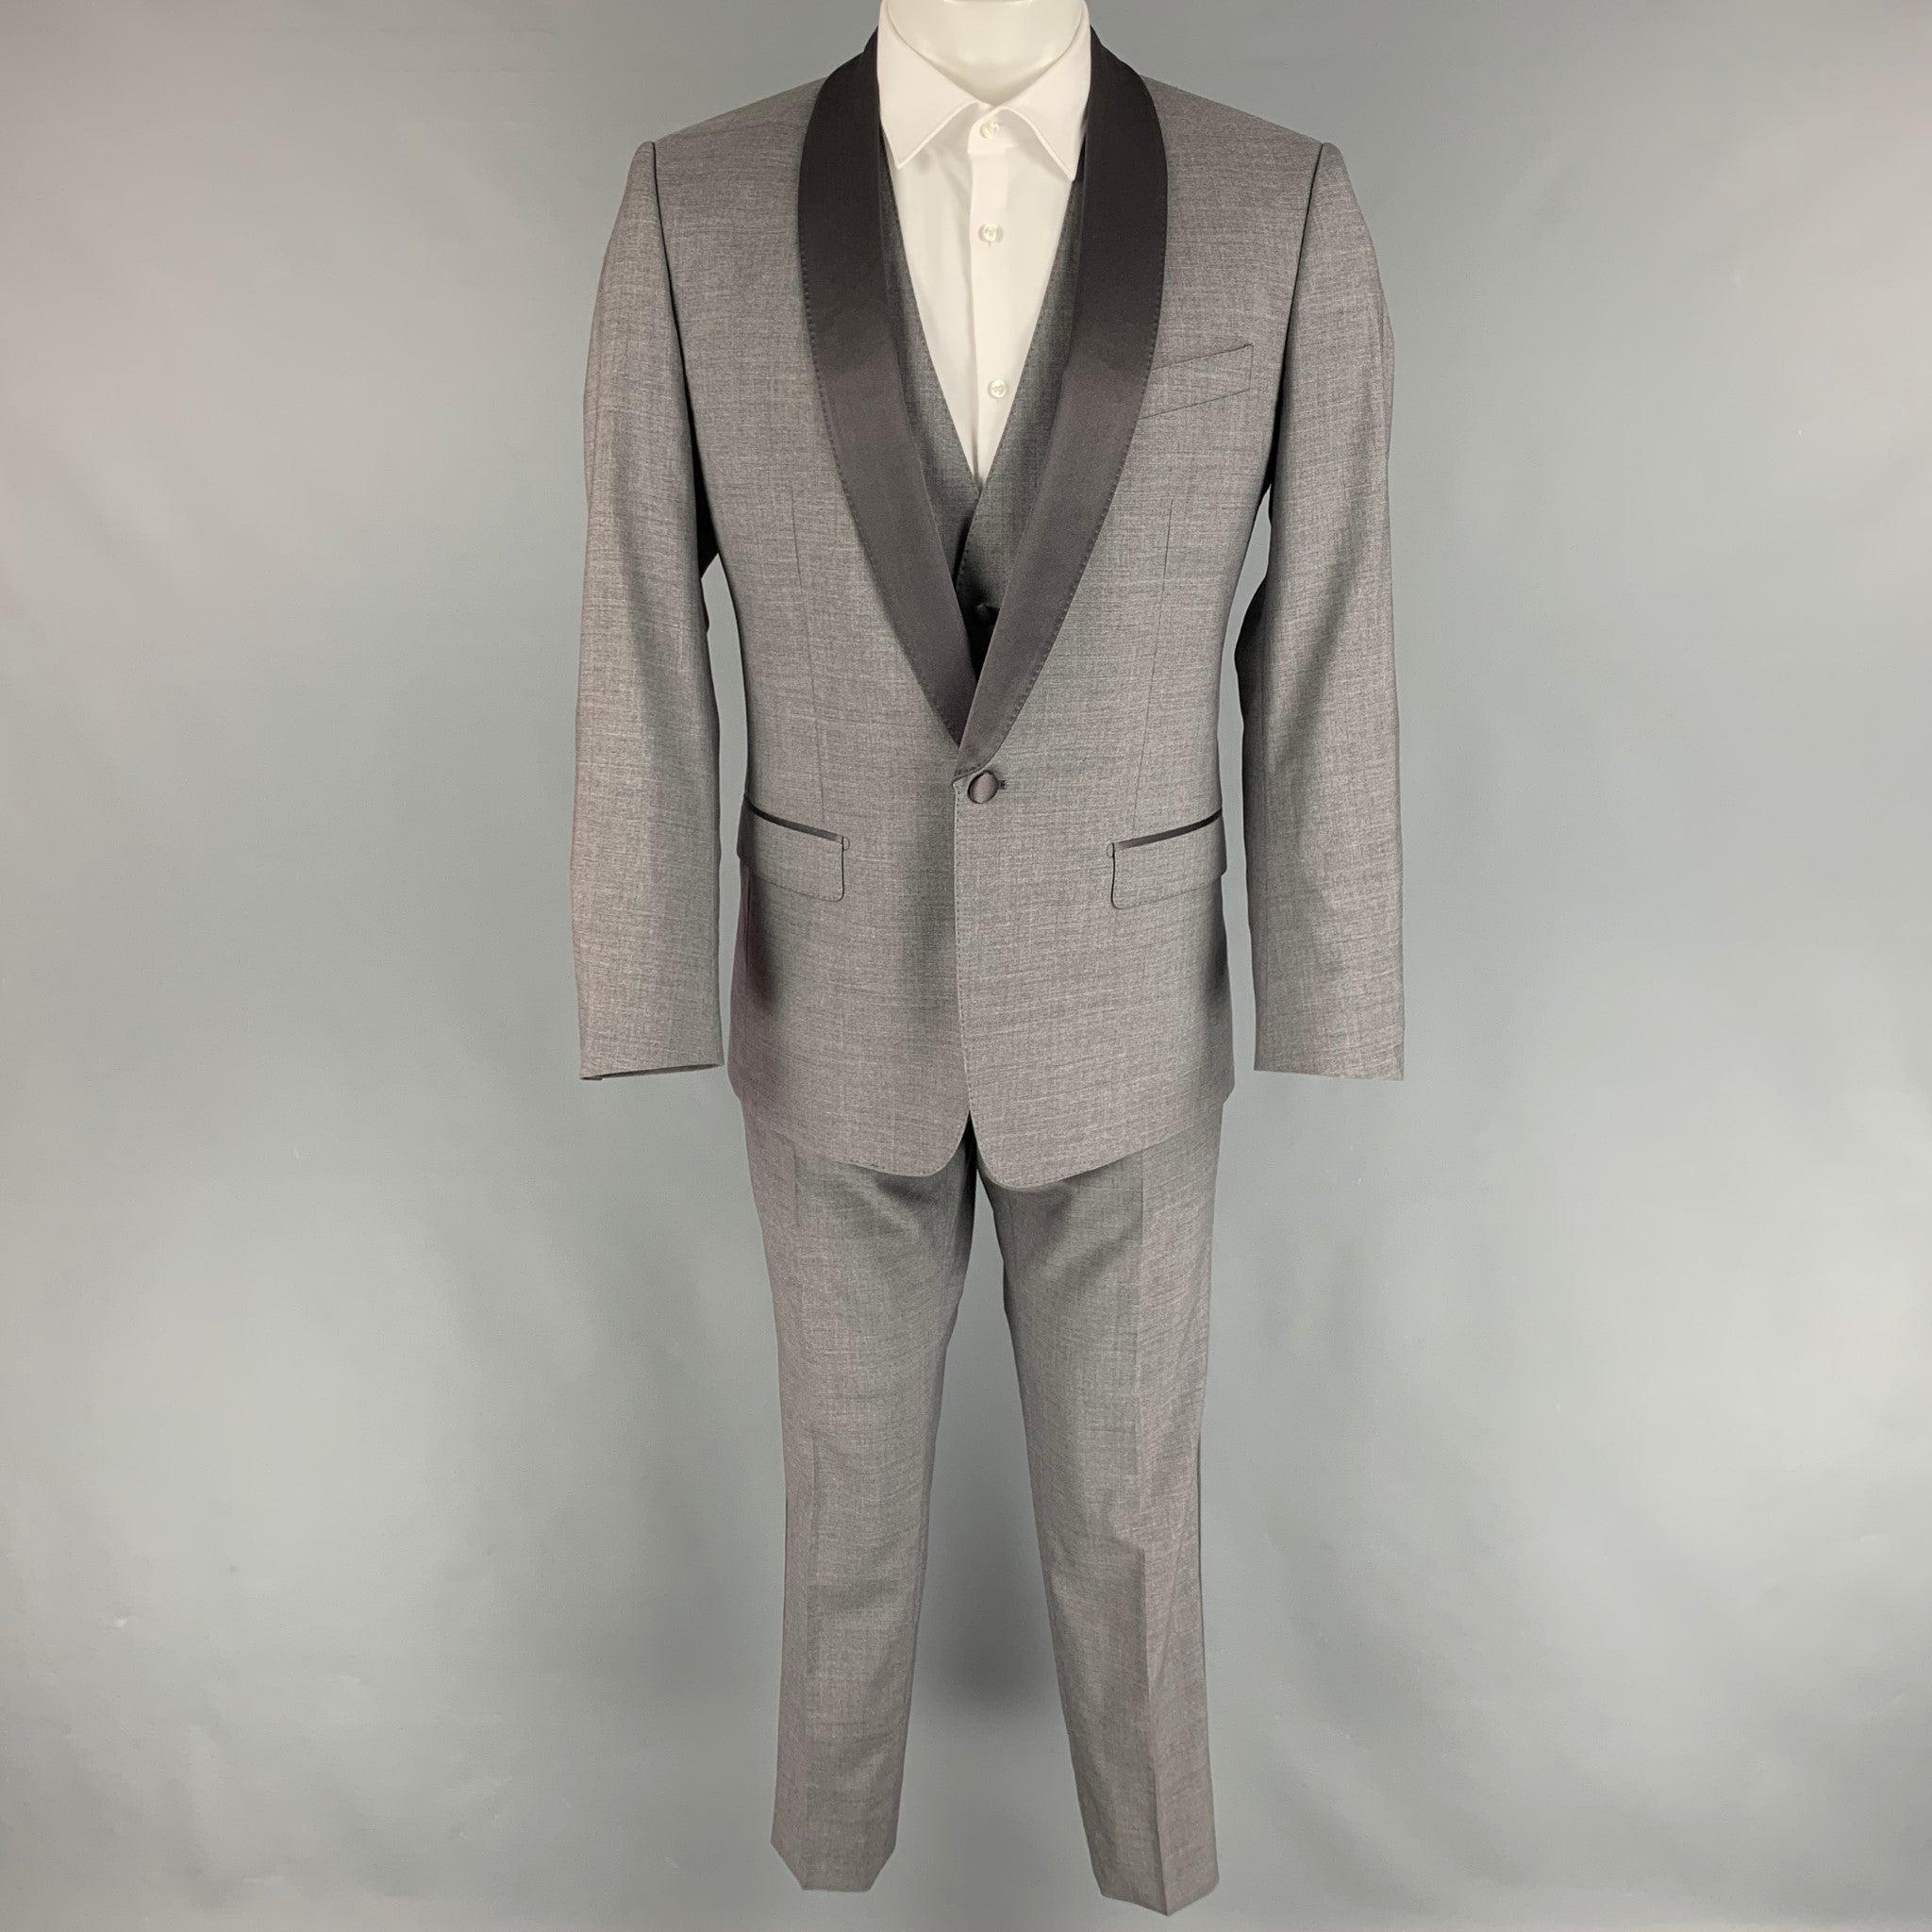 DOLCE & GABBANA Size 38 Grey Wool Blend Shawl Collar 3 Piece Tuxedo Suit In Excellent Condition For Sale In San Francisco, CA